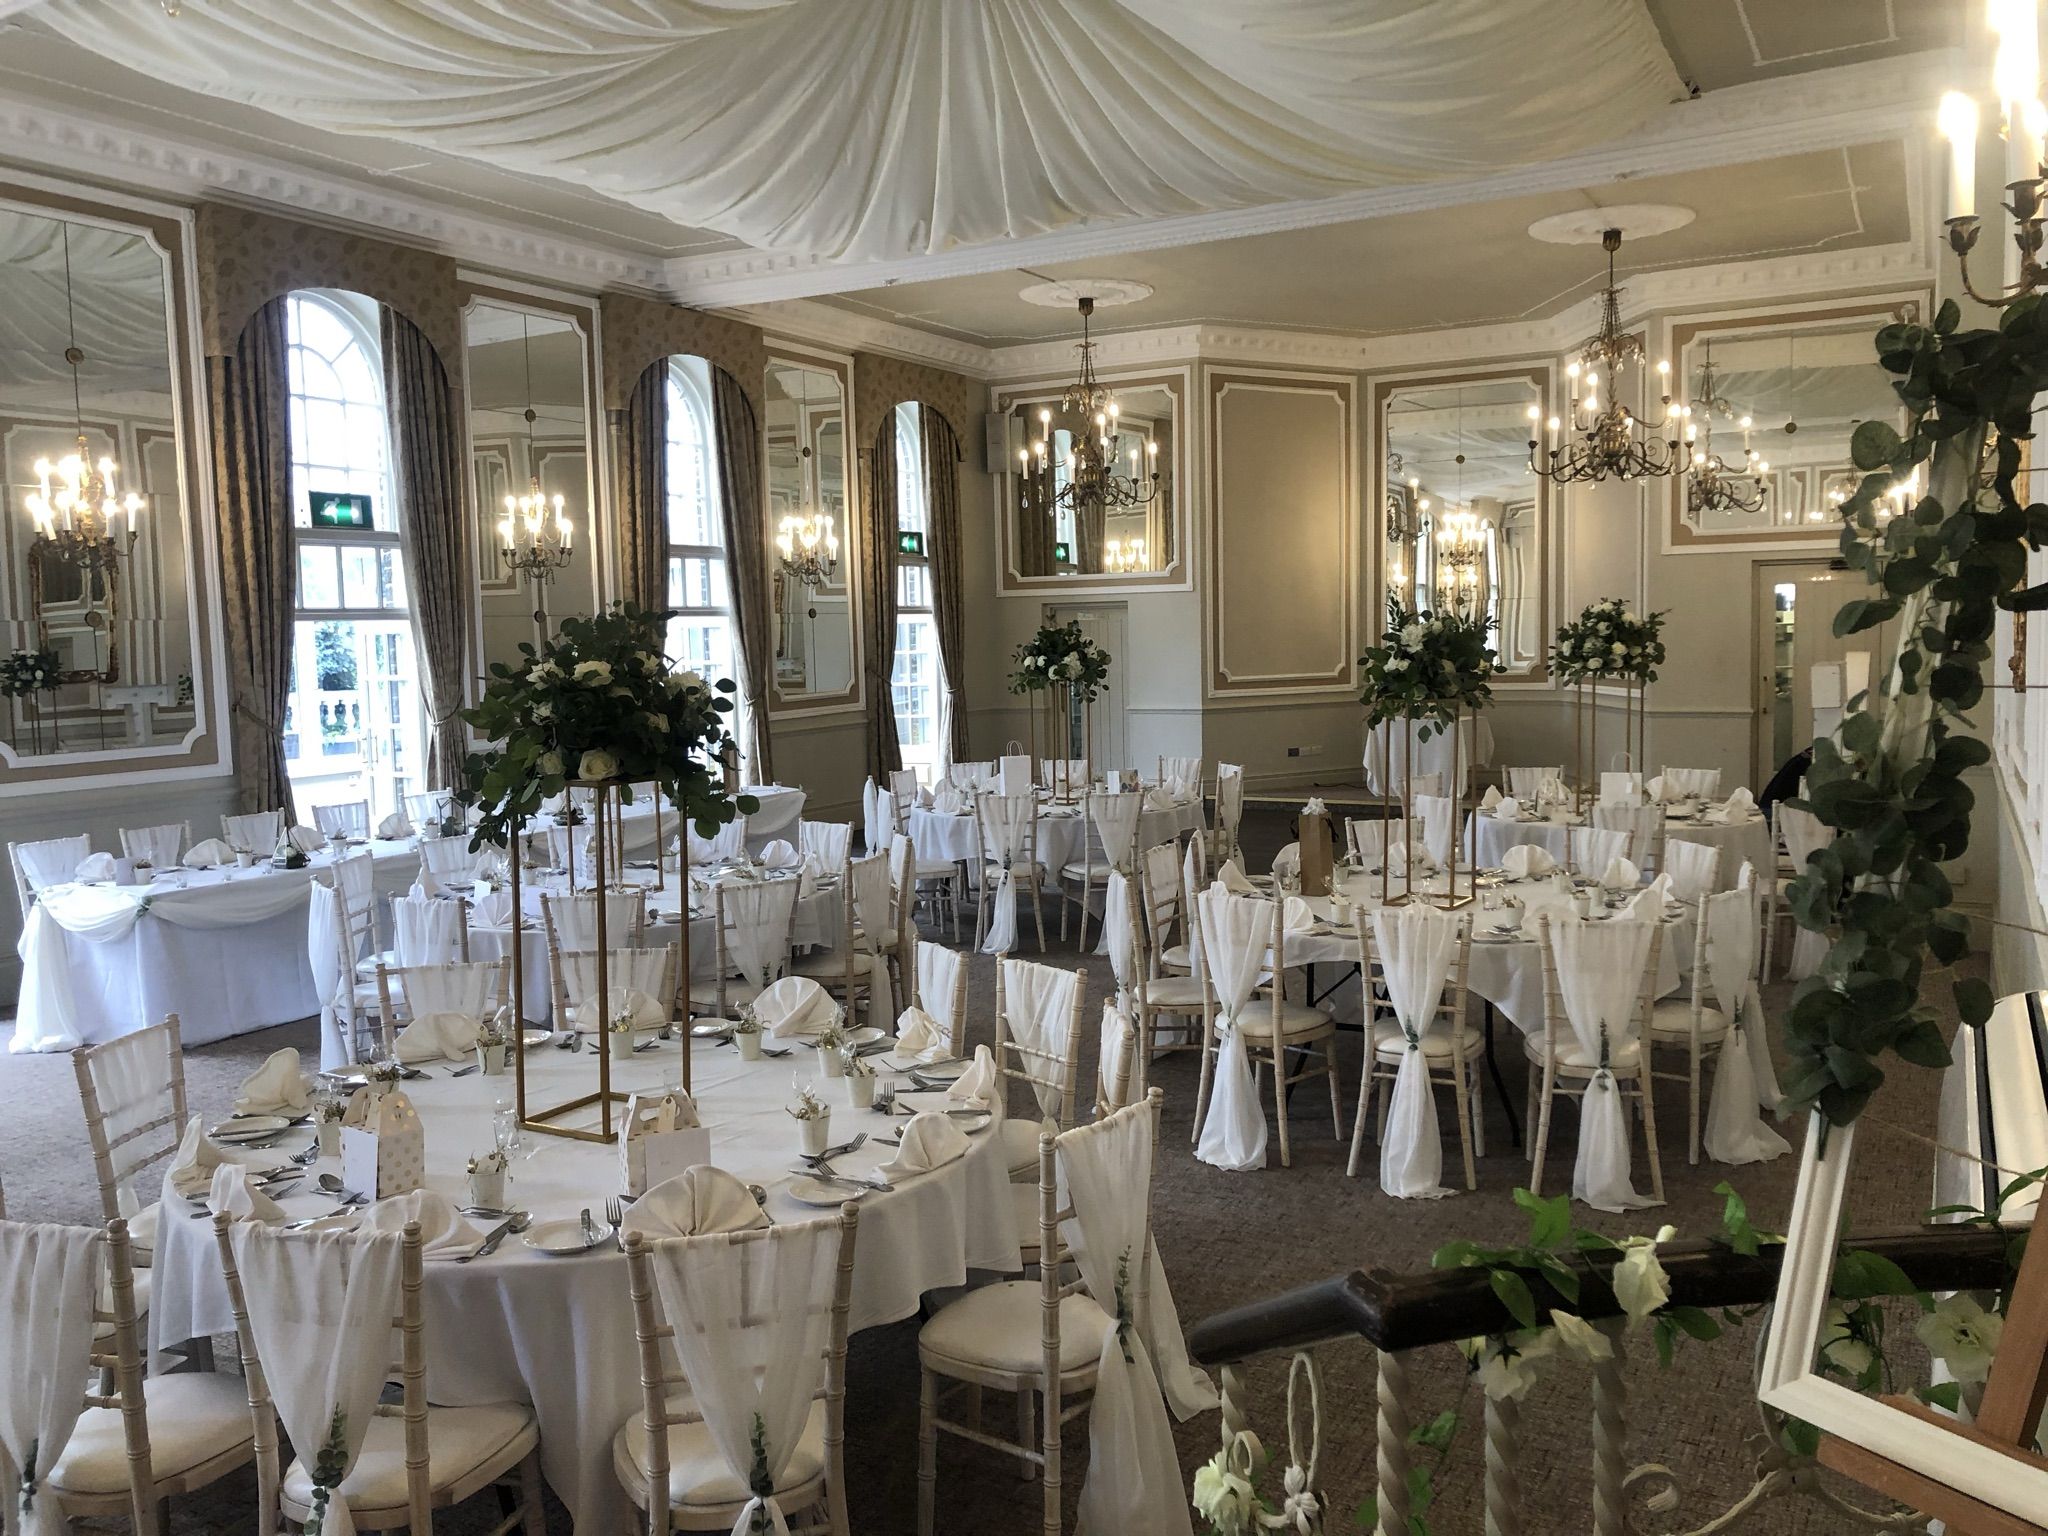 a room filled with tables and chairs covered in white linens.